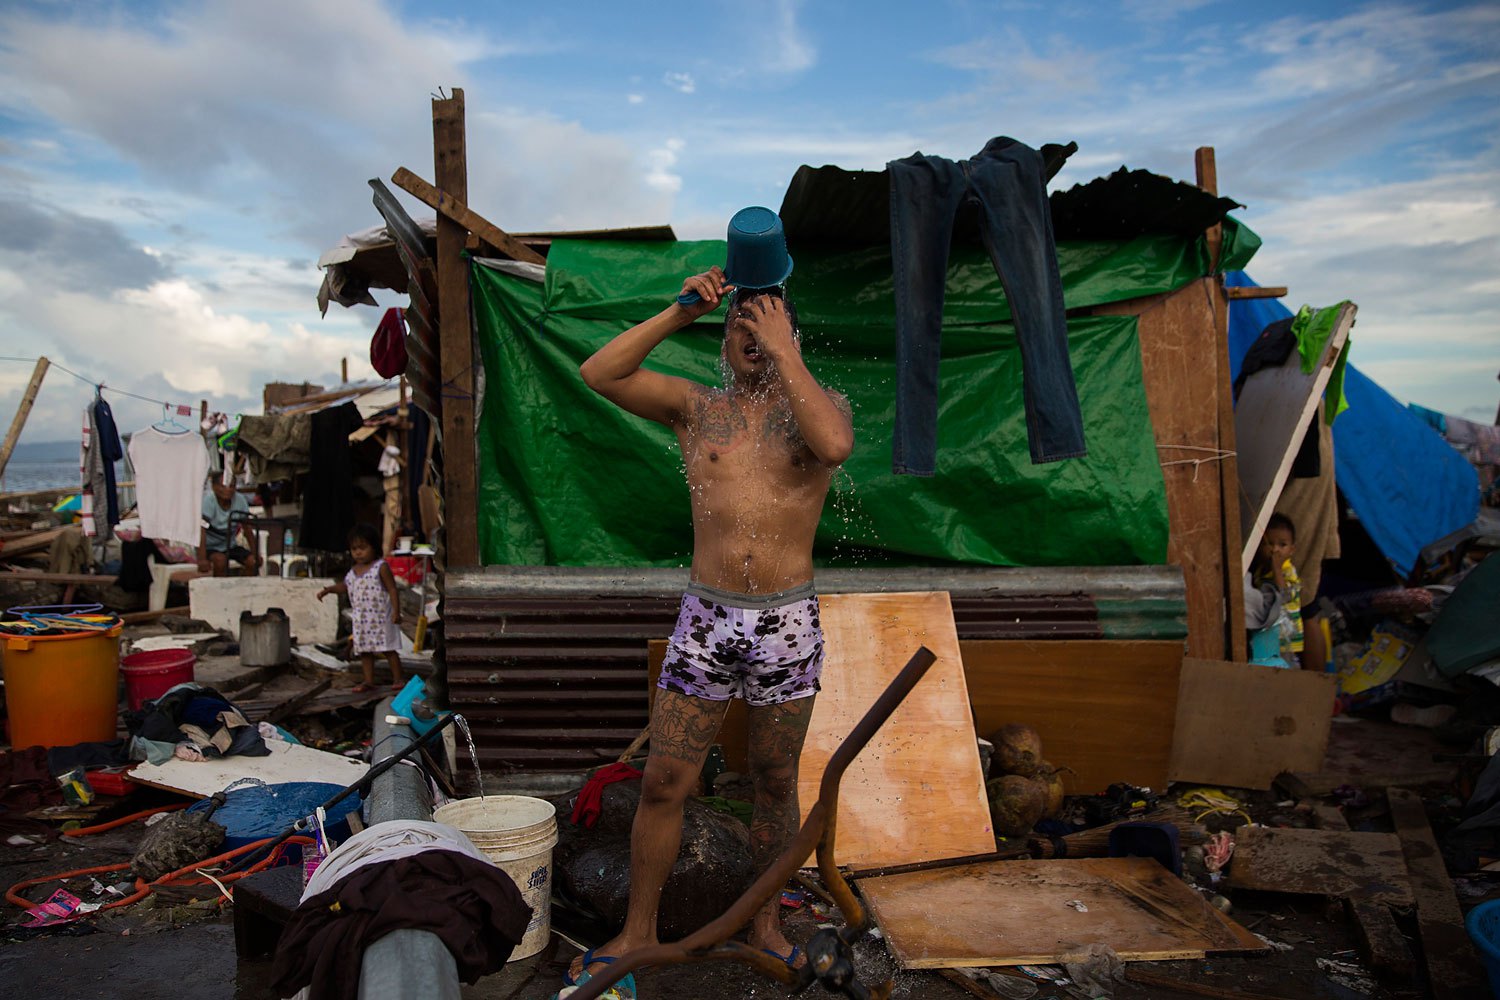 A man washes outside his temporary home on the site of his former home that was destroyed by Haiyan Typhoon in Tacloban, Philippines on November 13, 2013.